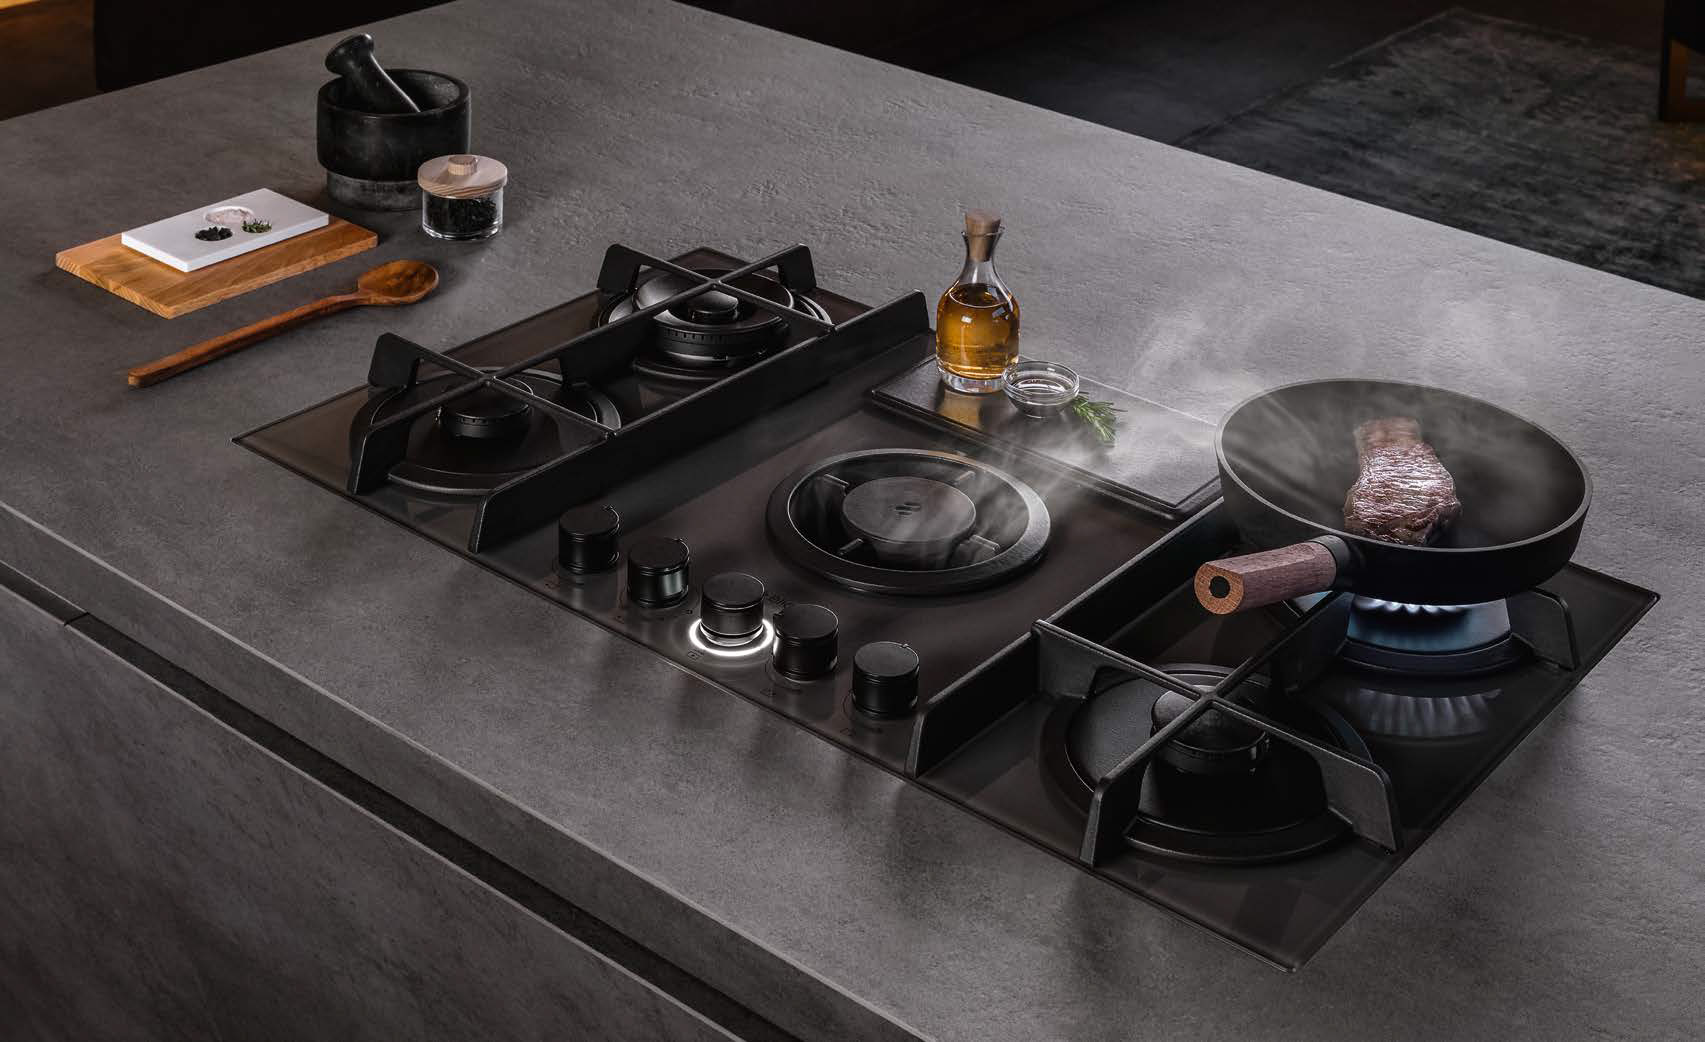 NikolaTesla Flame, the practicalness of an aspiration hob combined with the ease of gas cooking